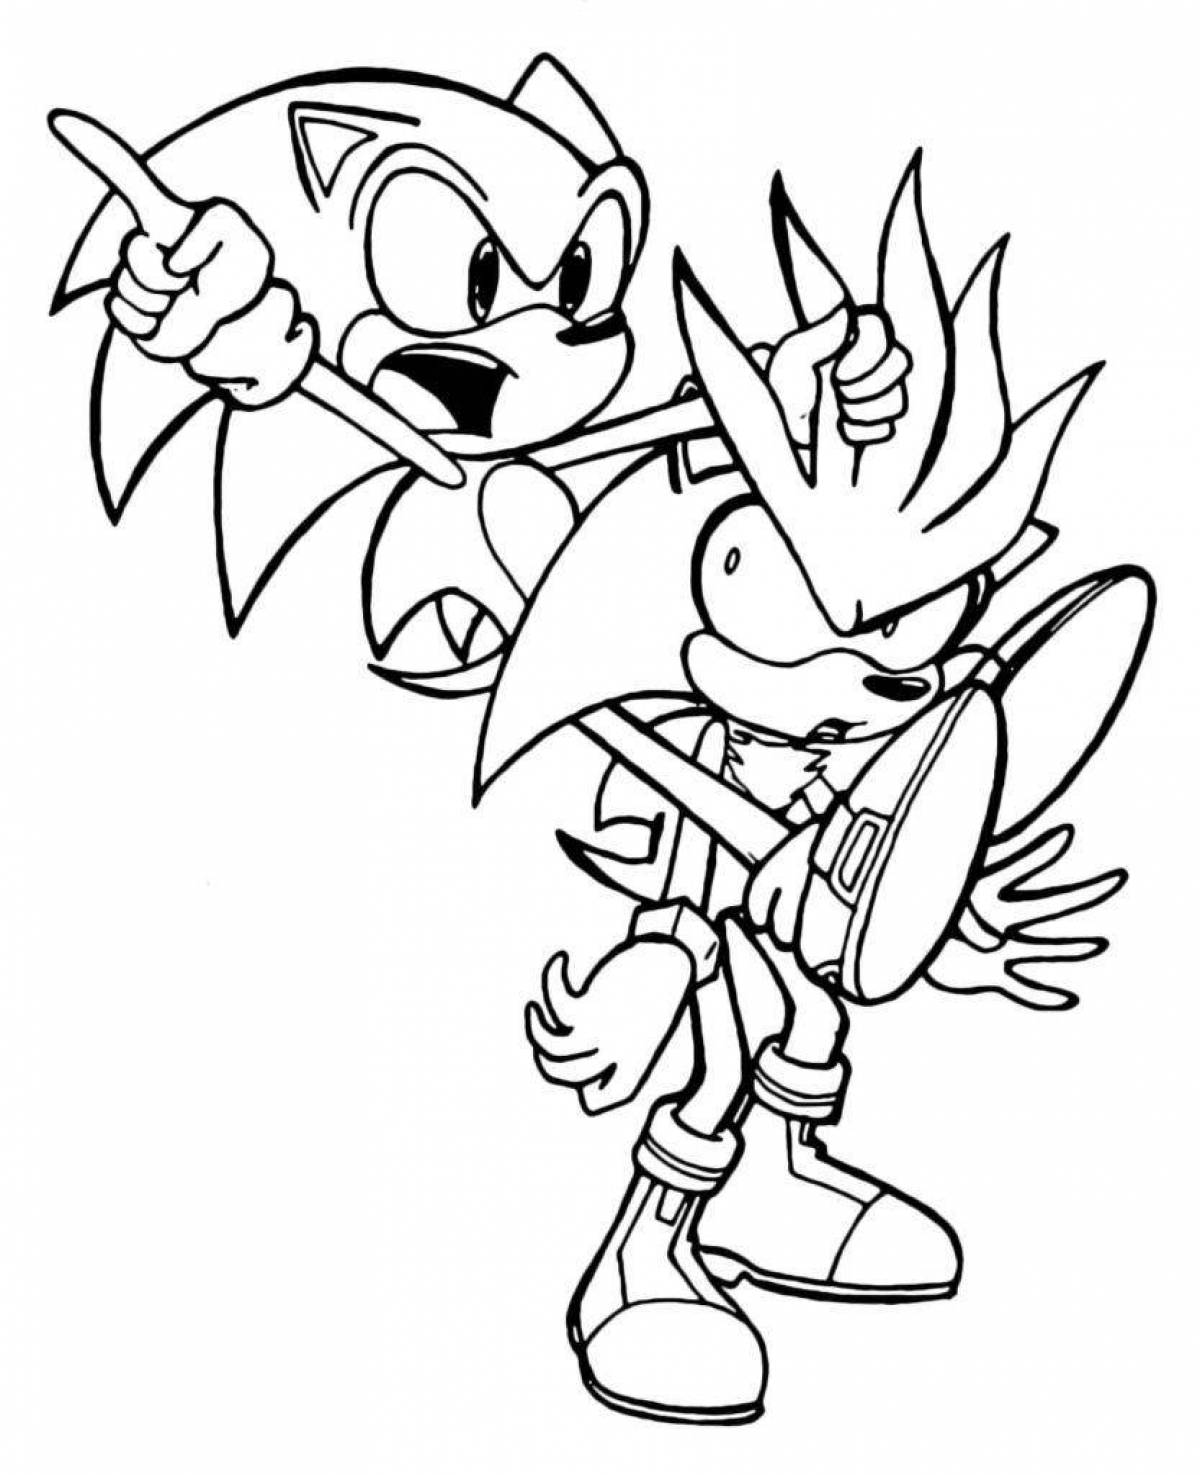 Humorous sonic shadow coloring book